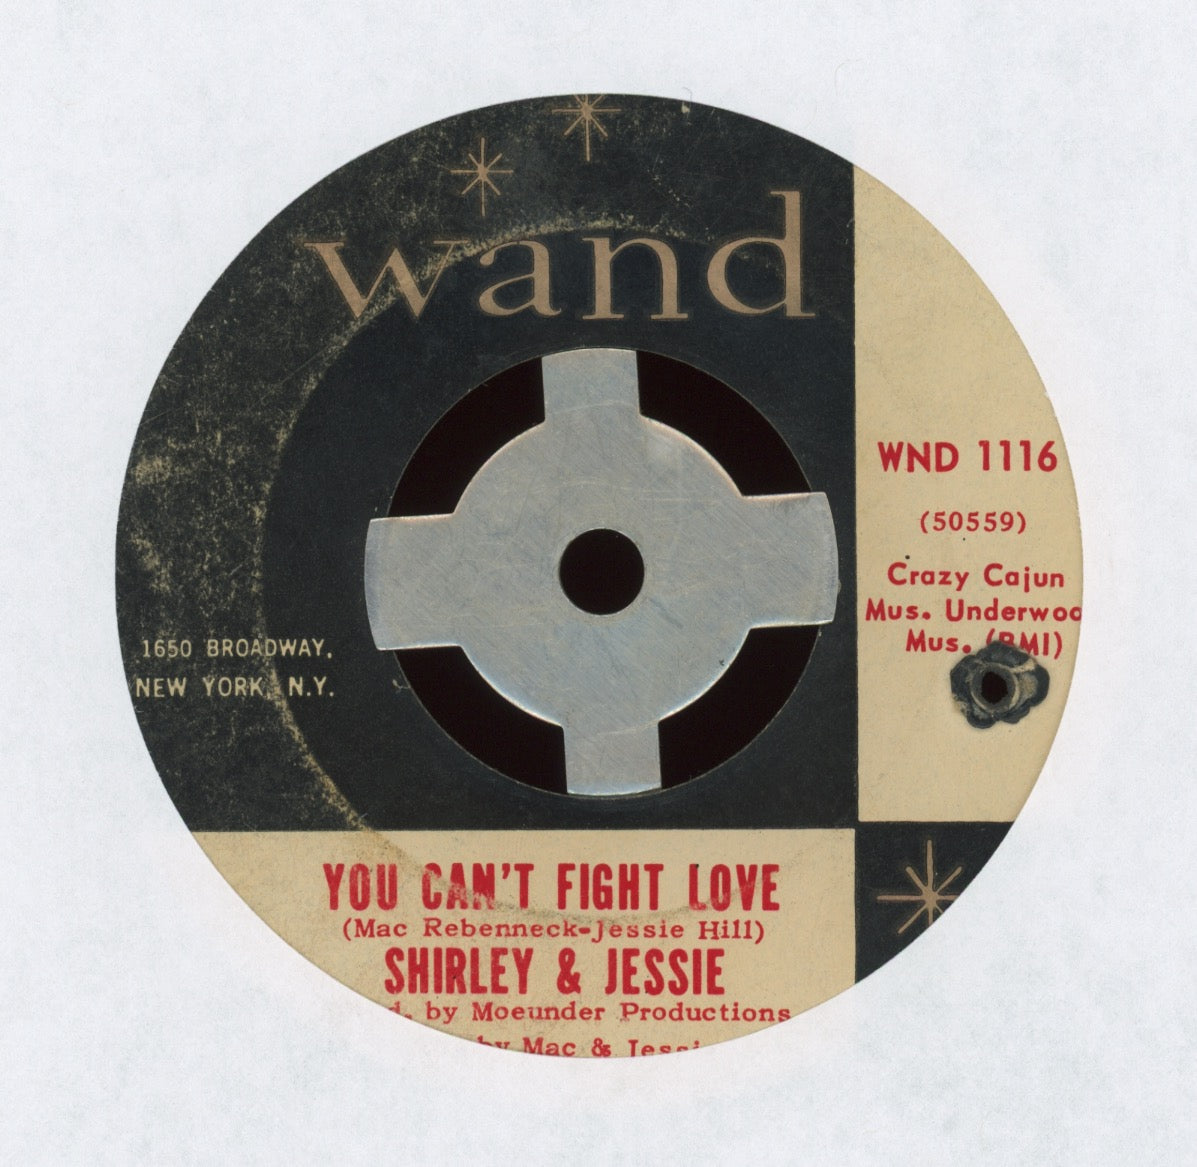 Shirley & Jessie - You Can't Fight Love on Wand Northern Soul 45